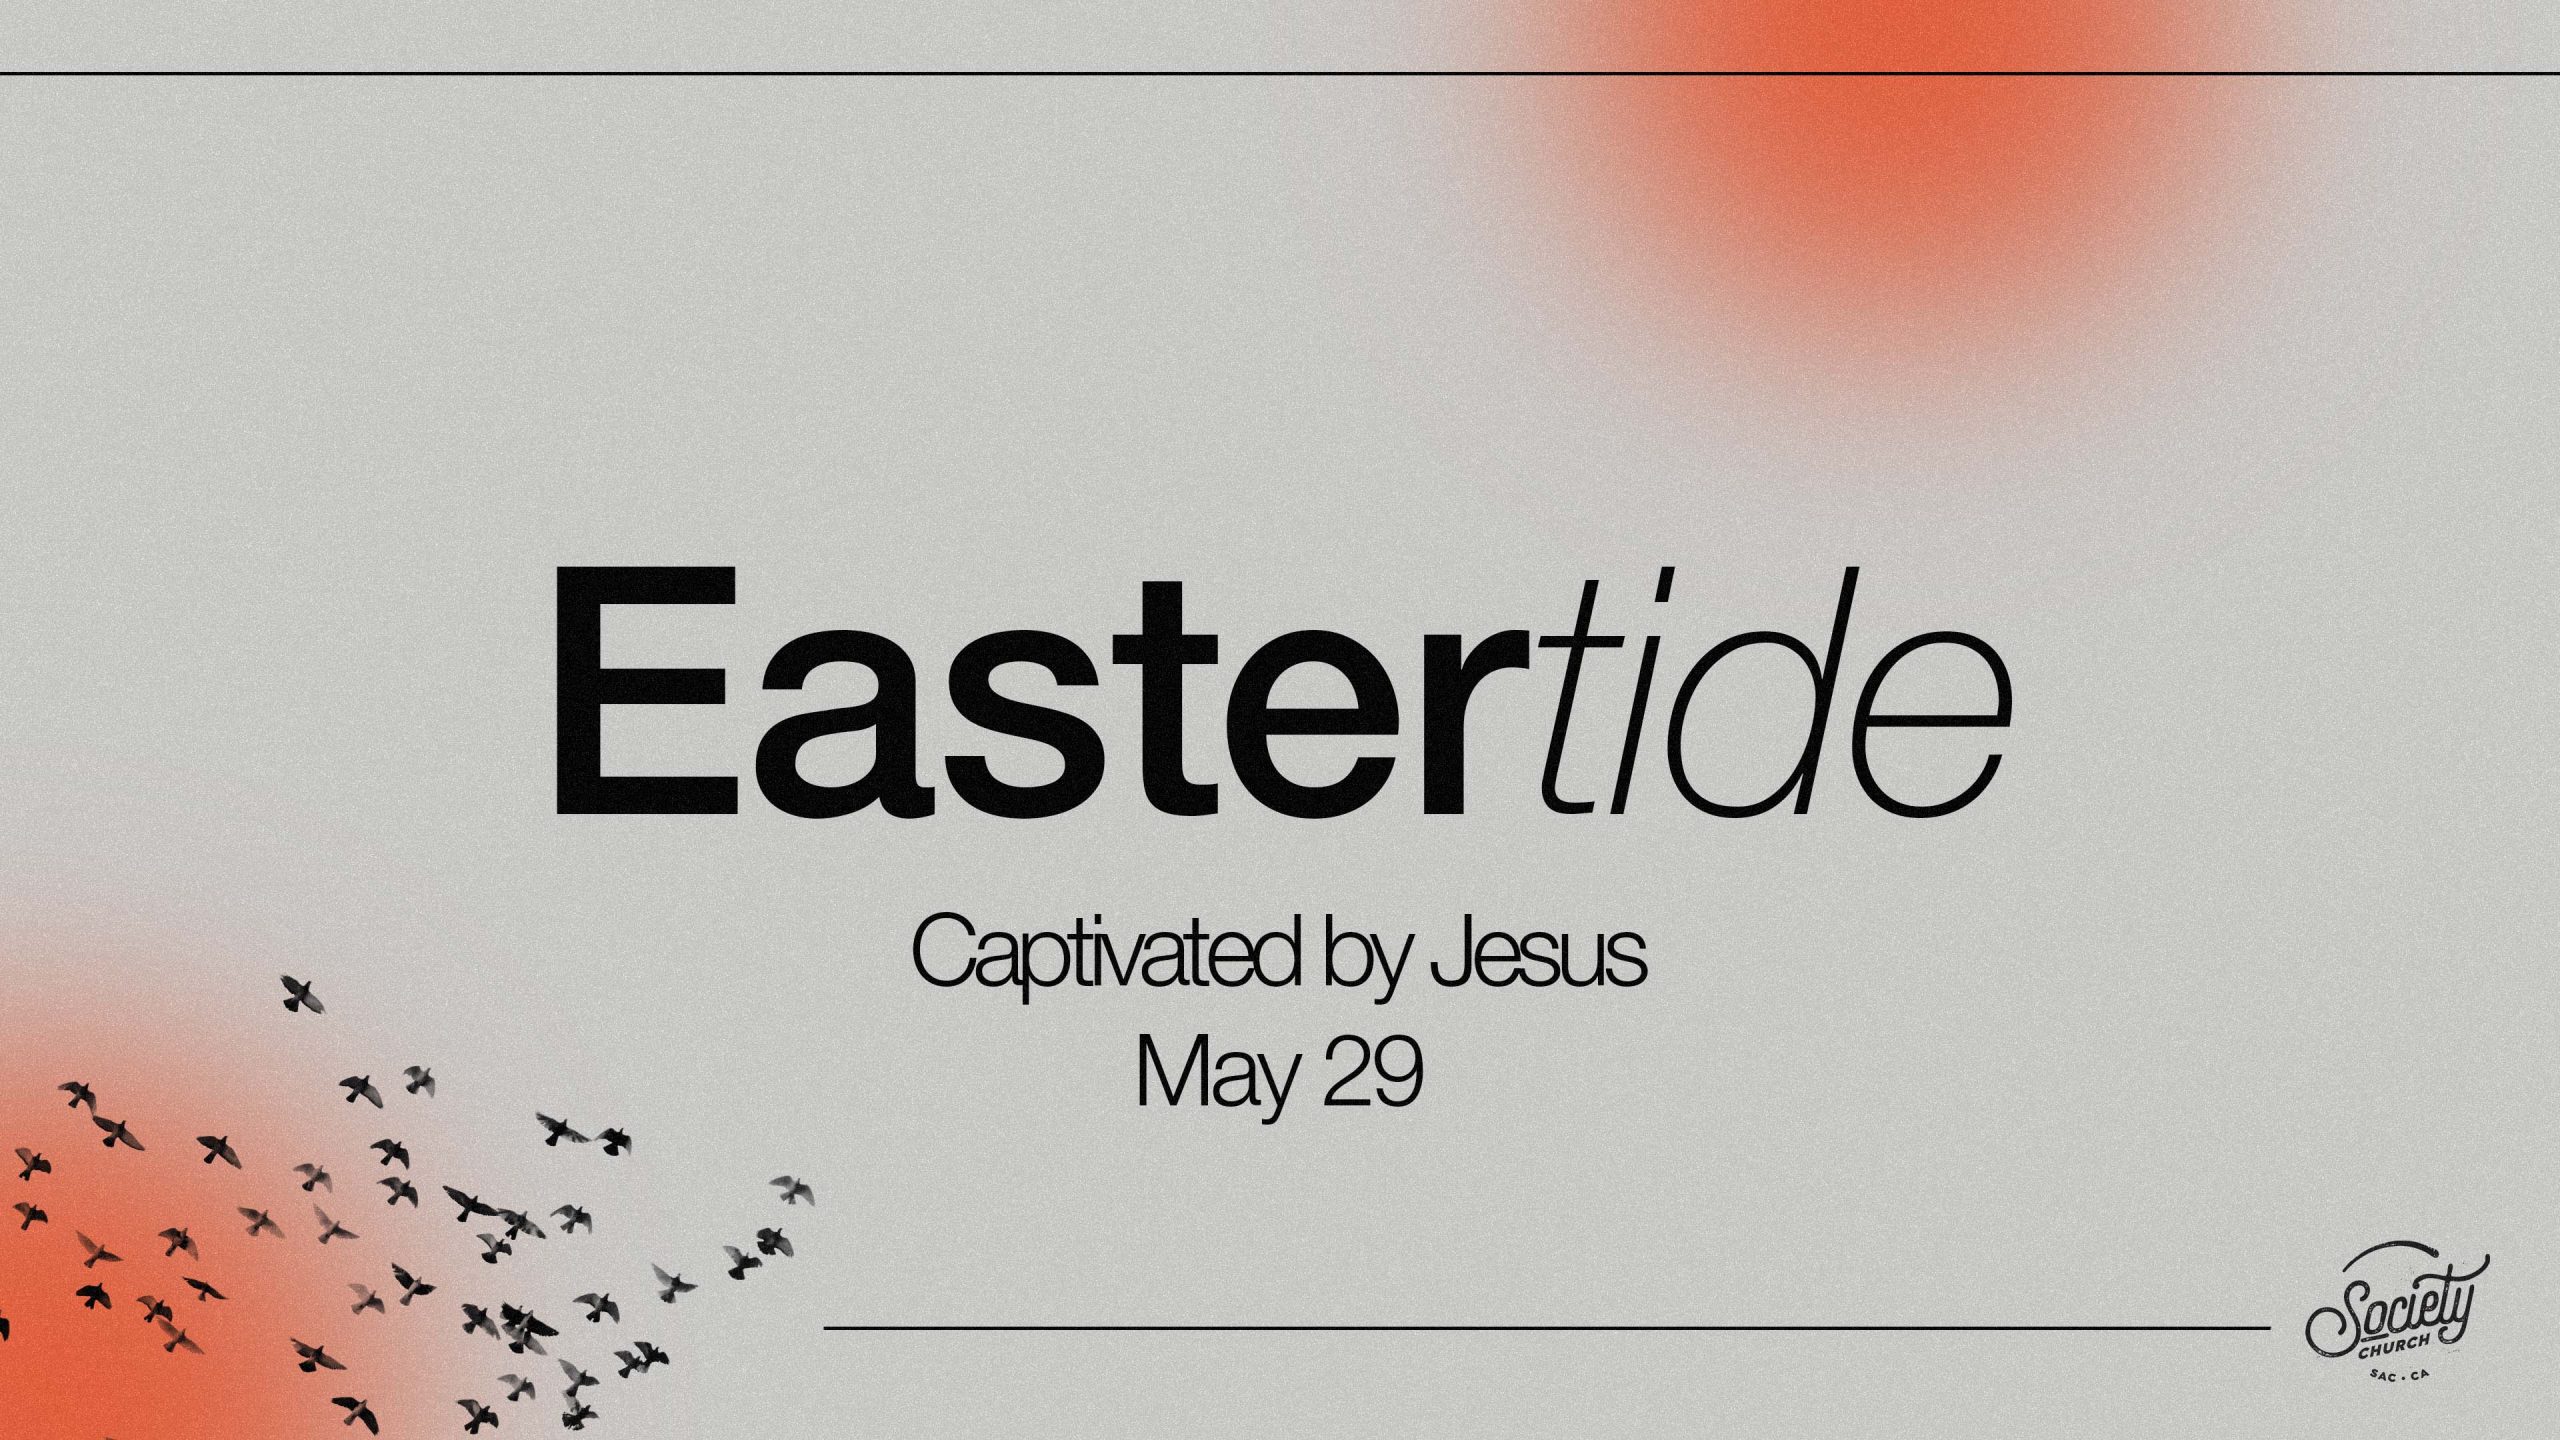 Eastertide: Captivated by Jesus